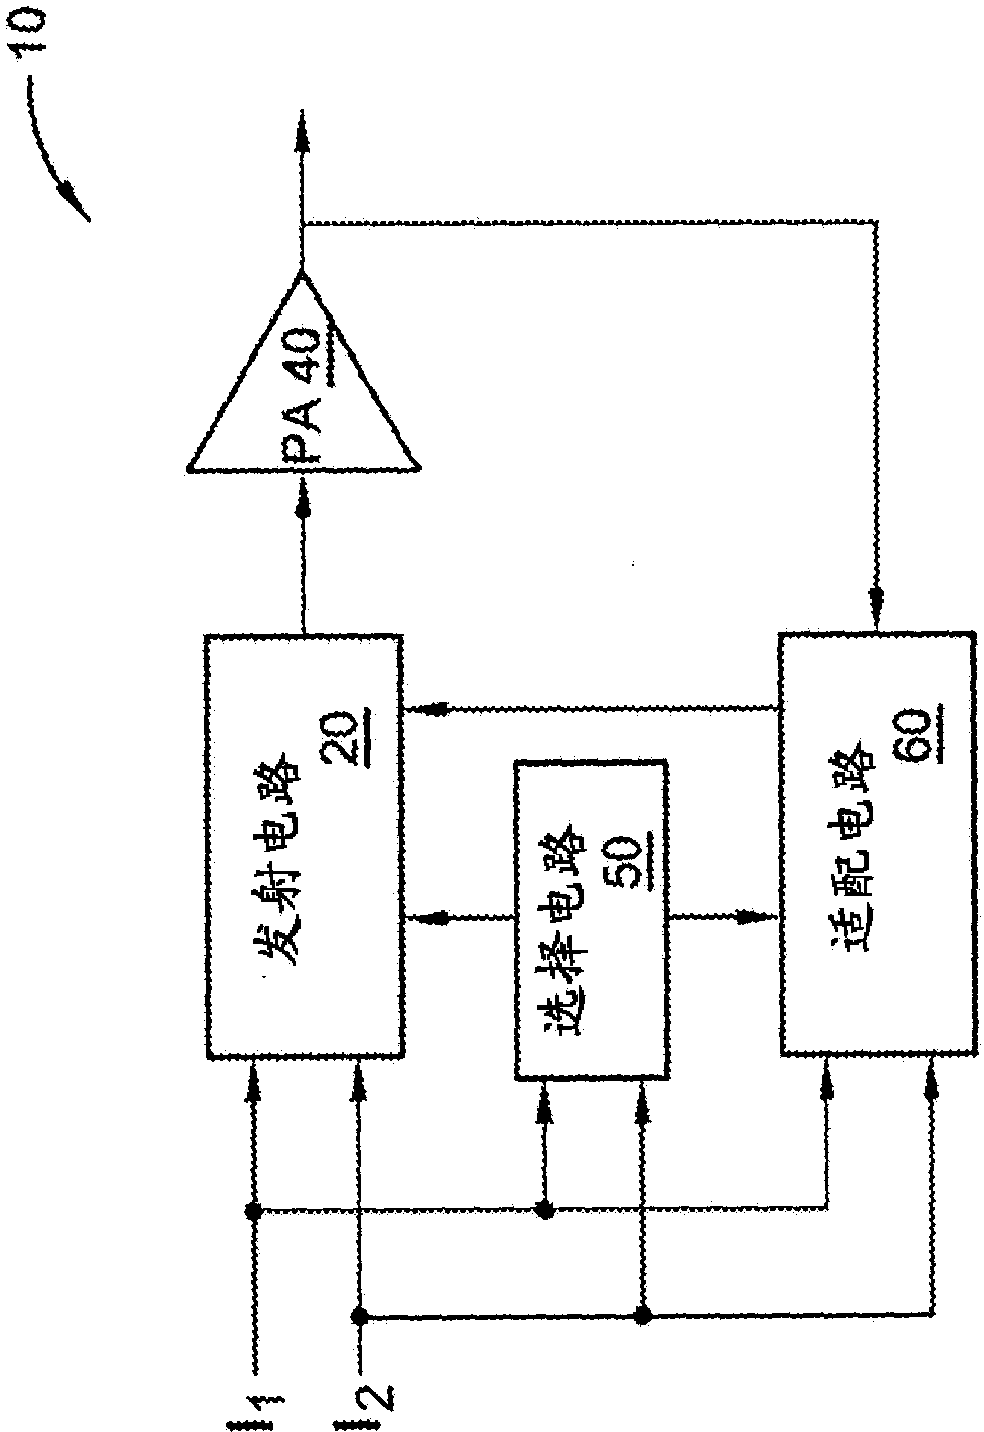 Linearization for a single power amplifier in a multi-band transmitter